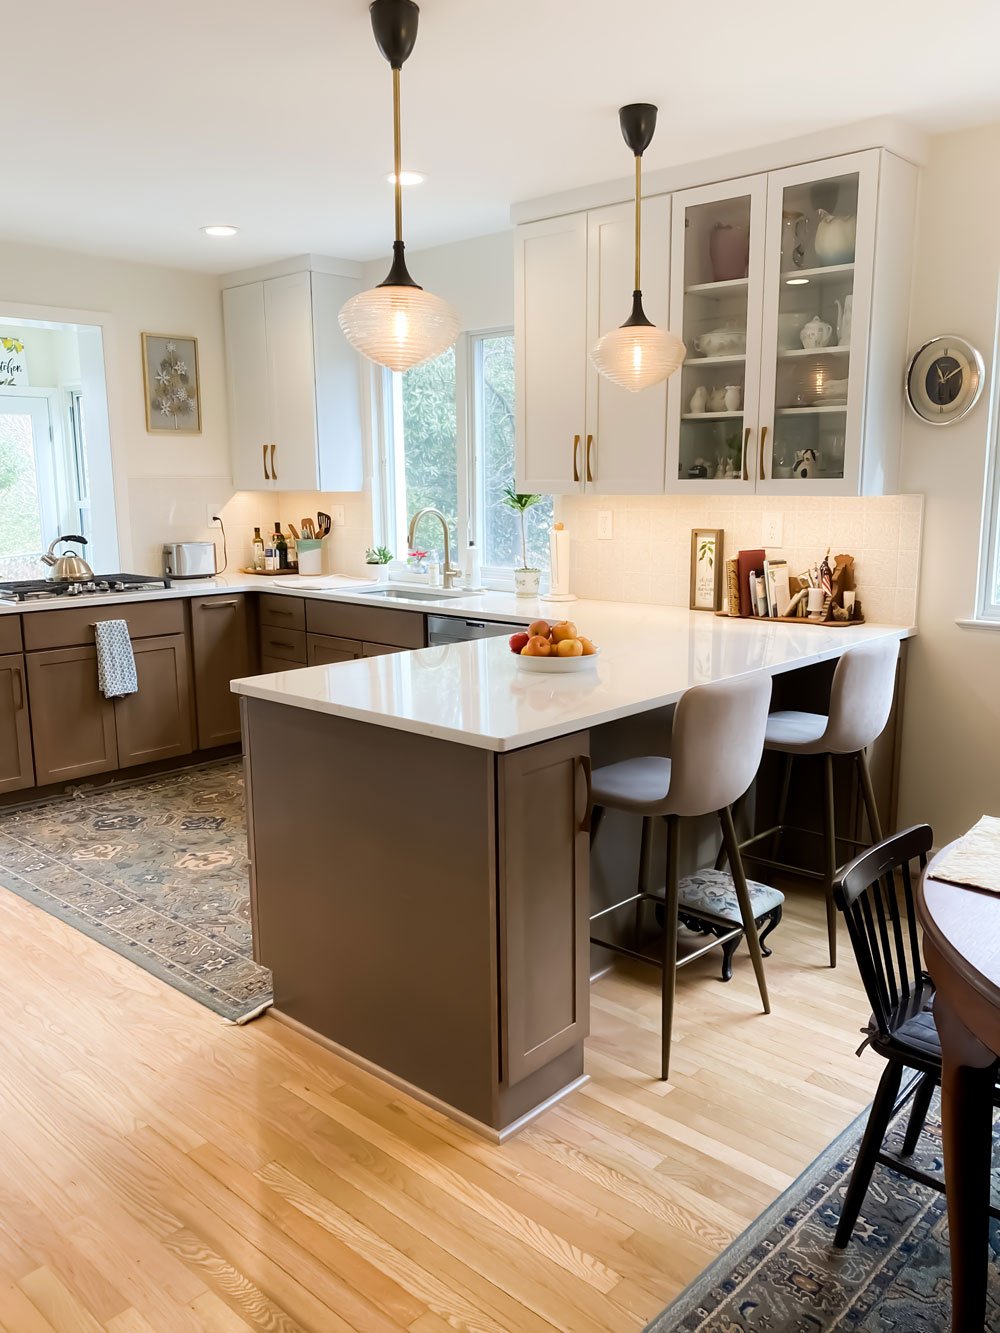 Kitchen island with two bar stools with backrests, a decorative bowl of fruit center piece, and white cabinetry with glass panelling